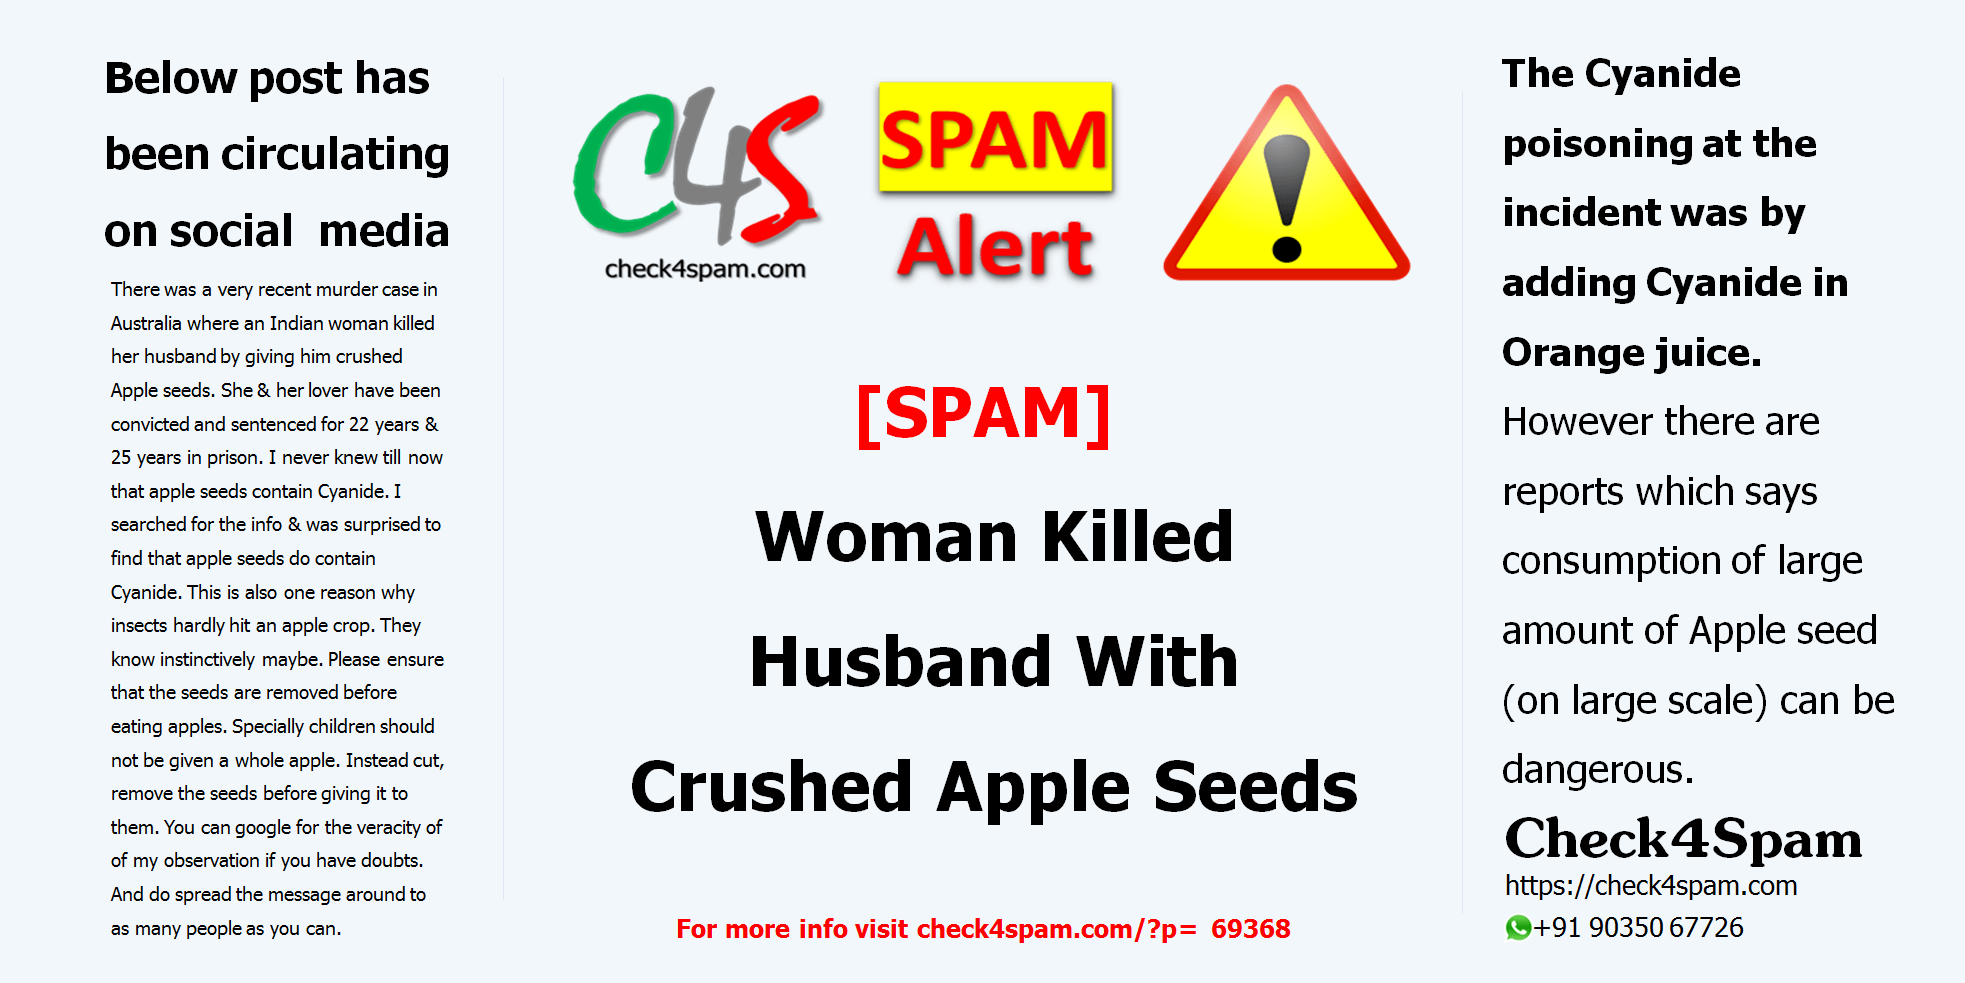 Woman Killed Husband With Crushed Apple Seeds - SPAM